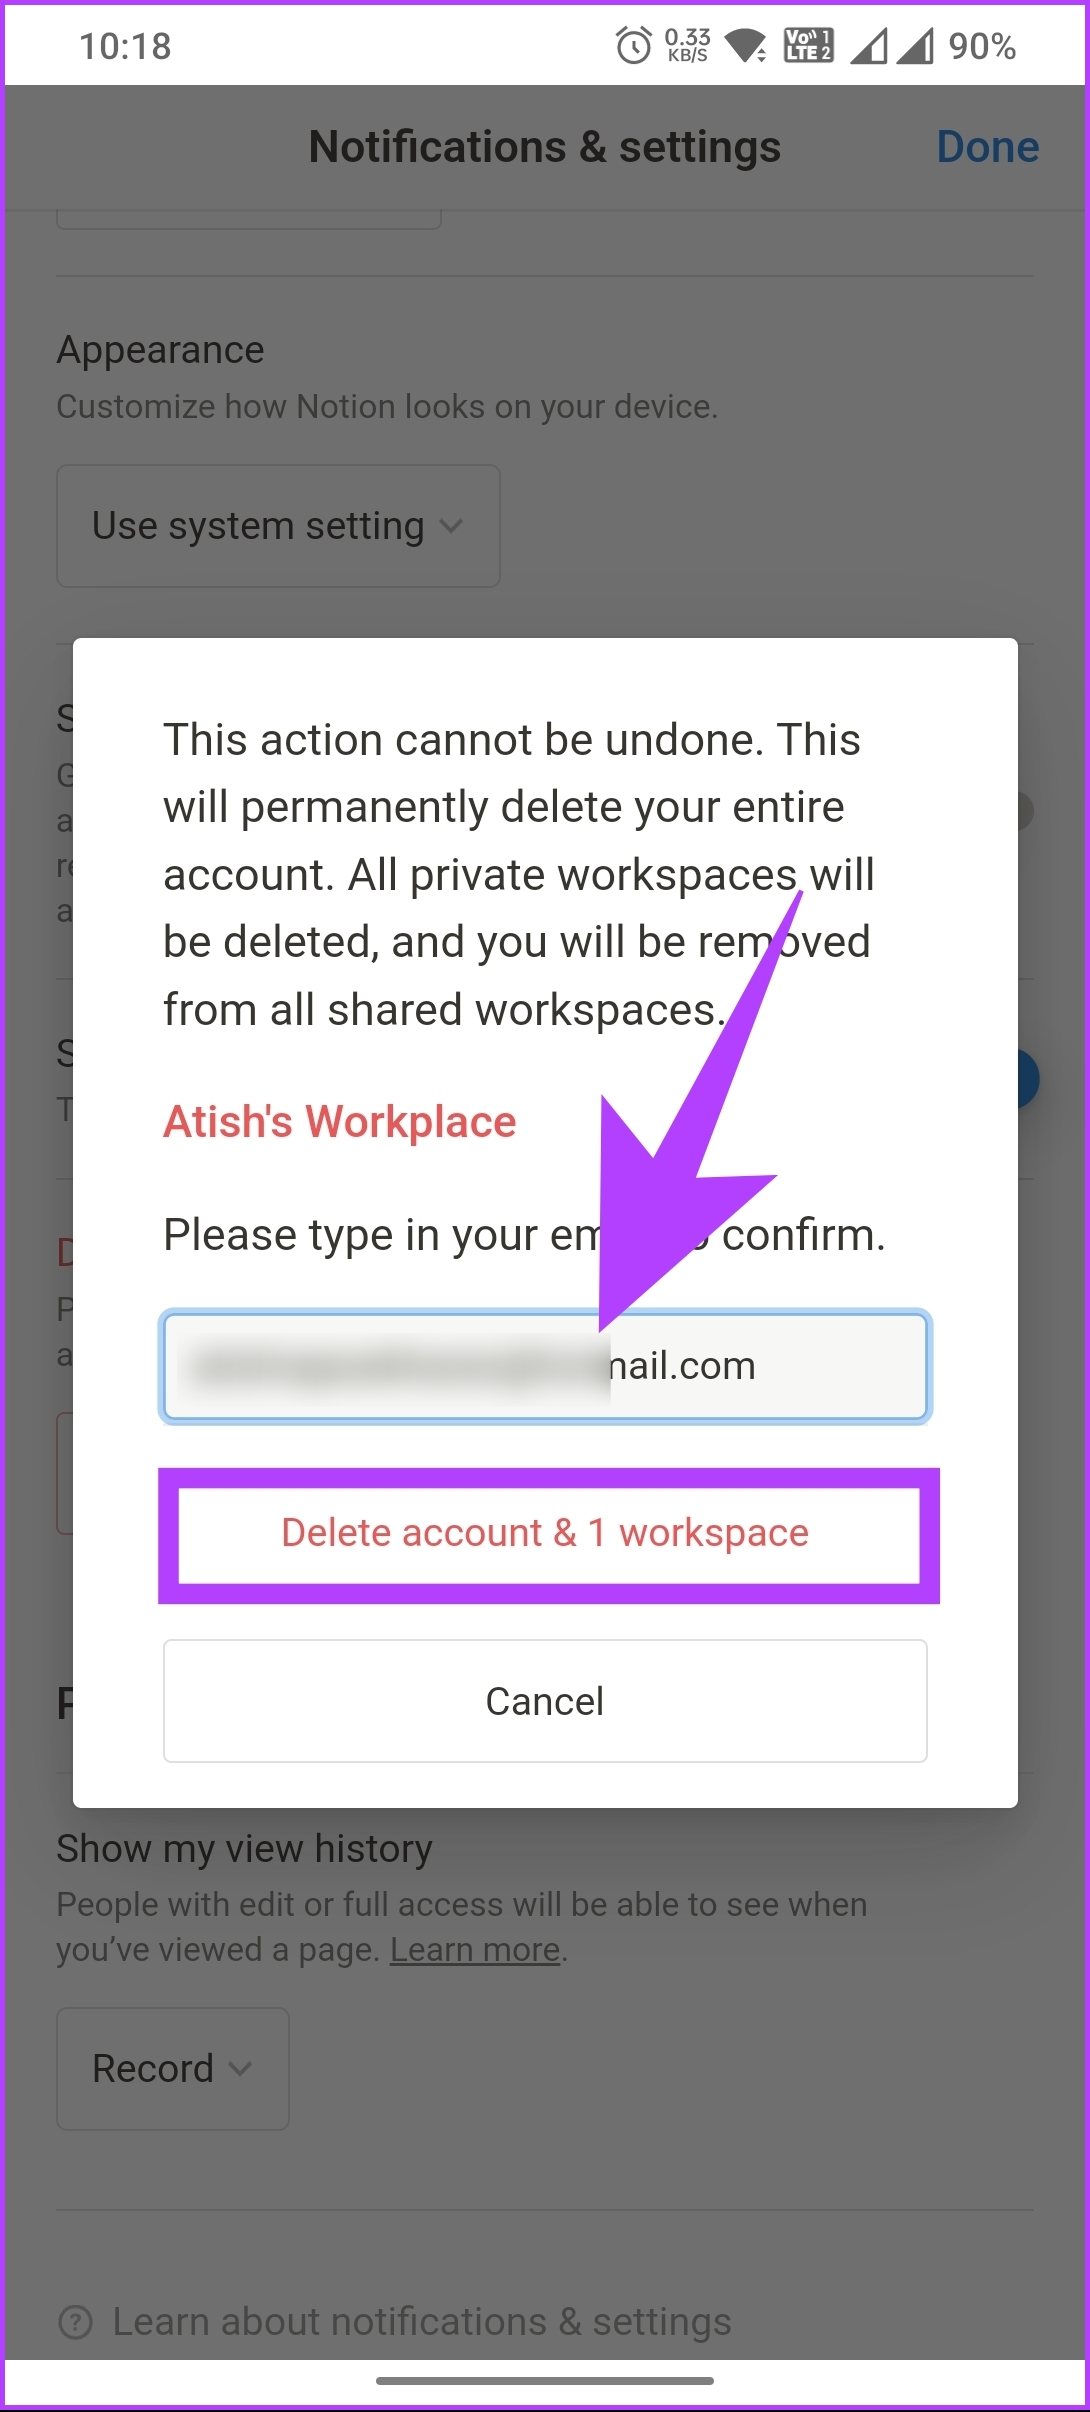 tap the 'Delete account & [x] workspace' button